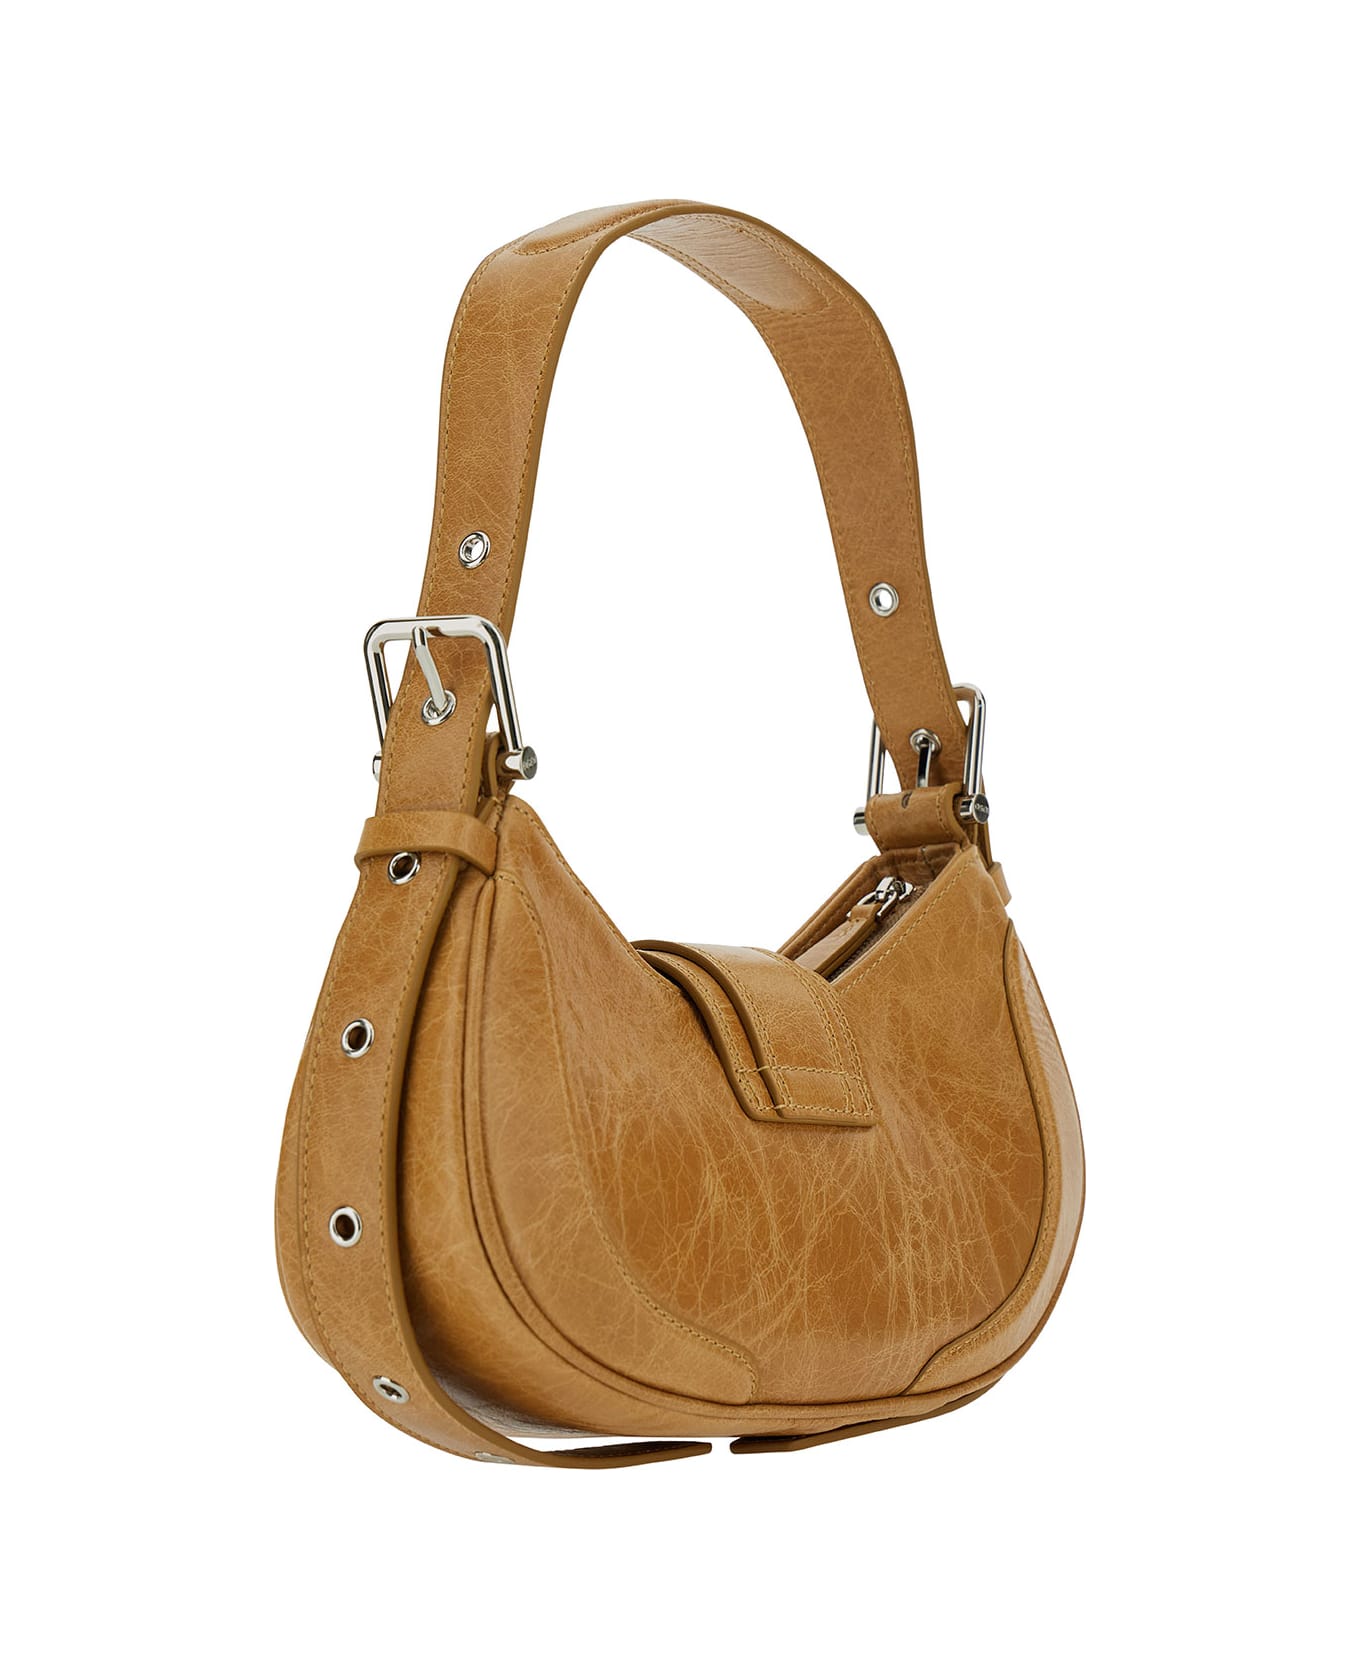 OSOI 'hobo Brocle' Brown Shoulder Bag In Hammered Leather Woman - Beige